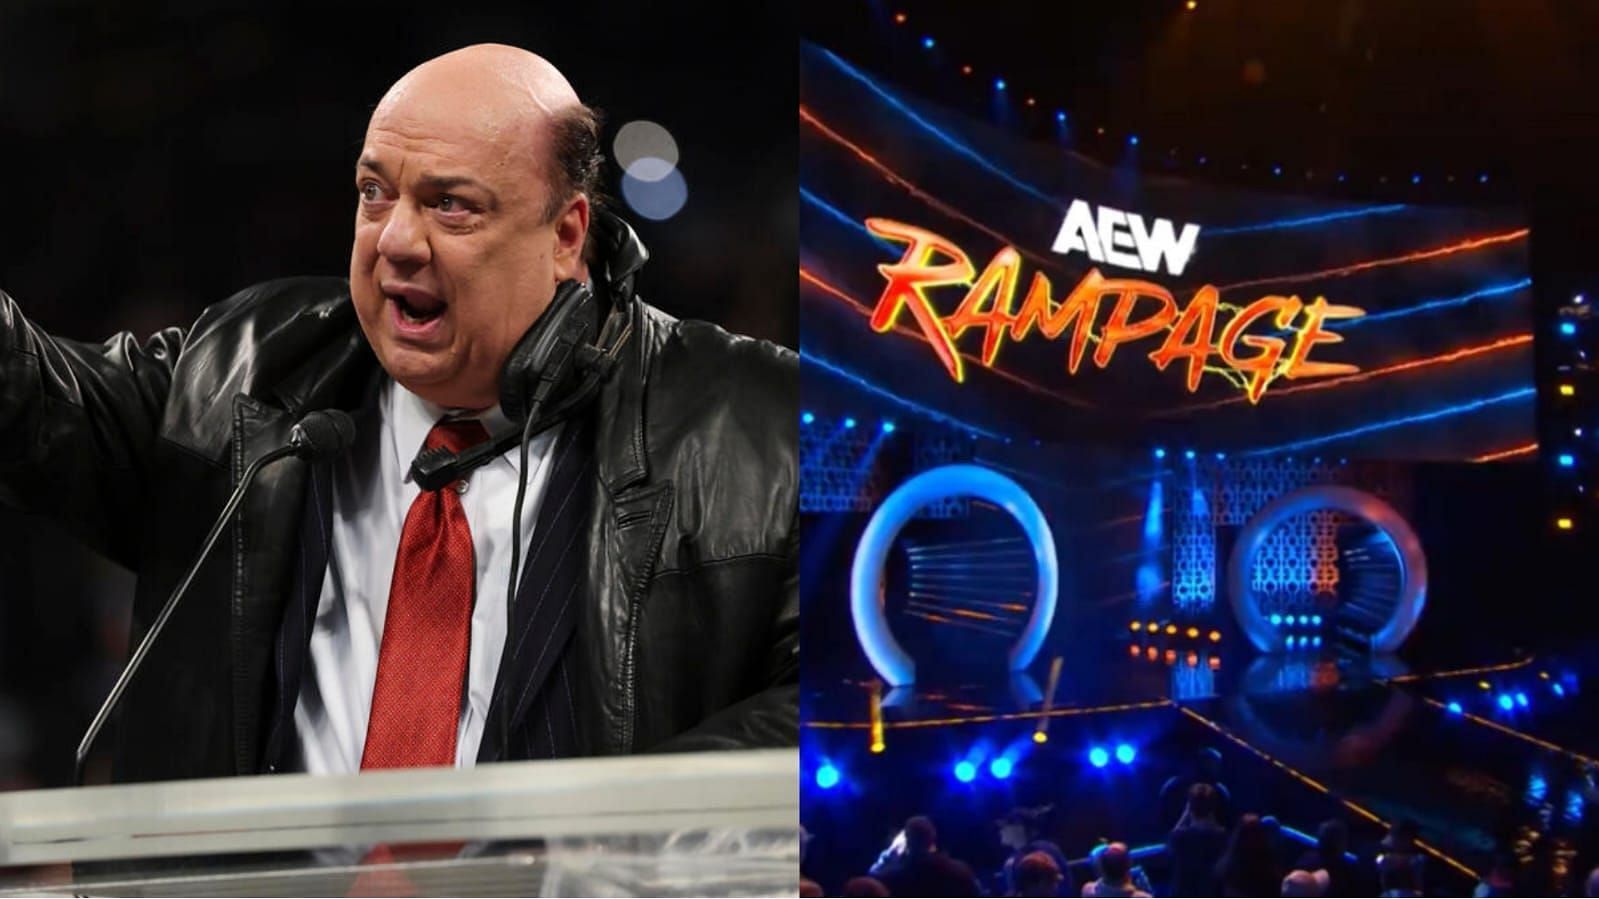 Paul Heyman was inducted into Hall of Fame this year